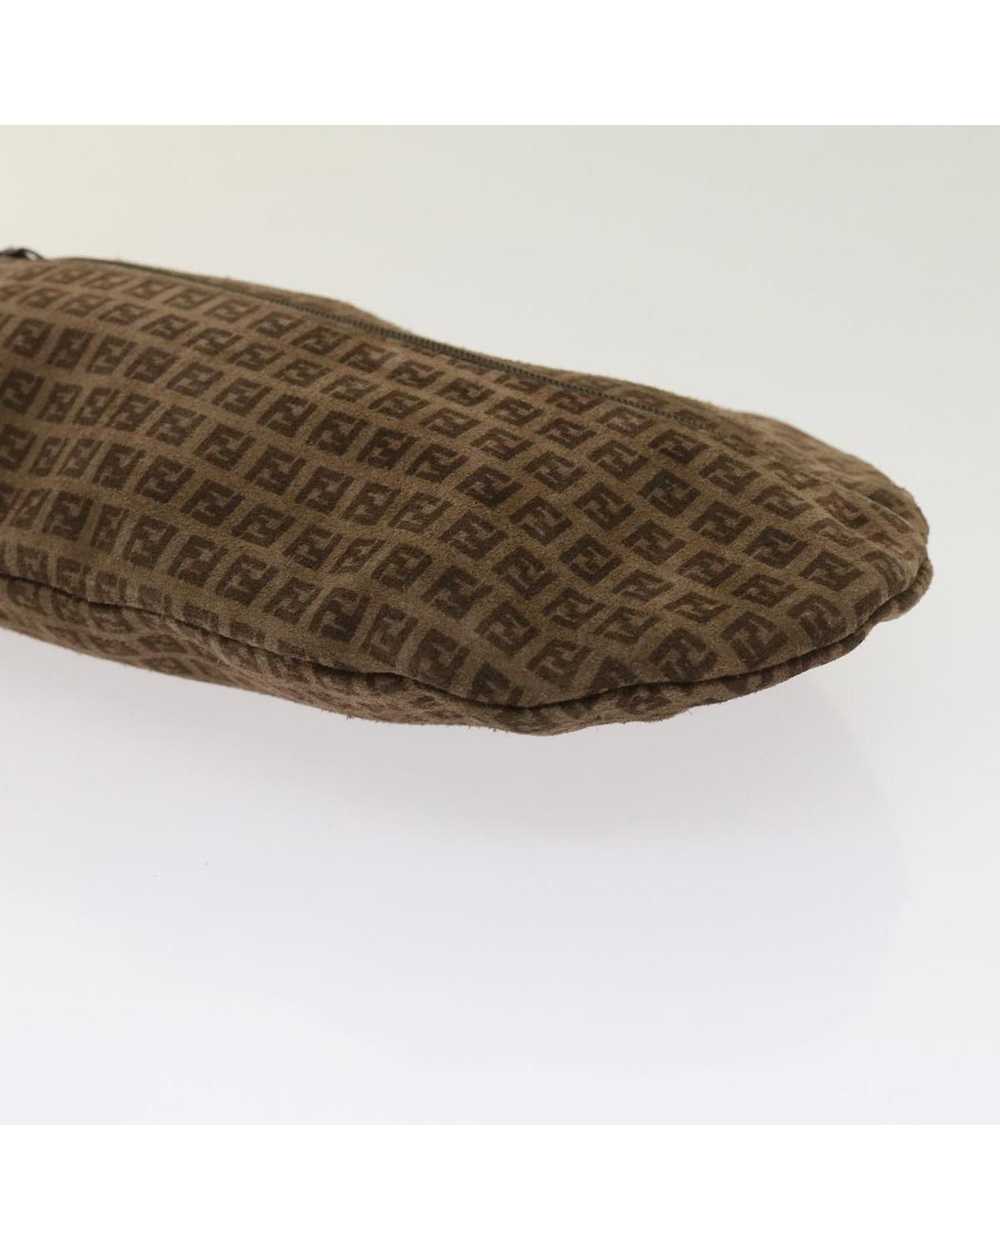 Fendi Exquisite Brown Suede Accessory with Metal … - image 8